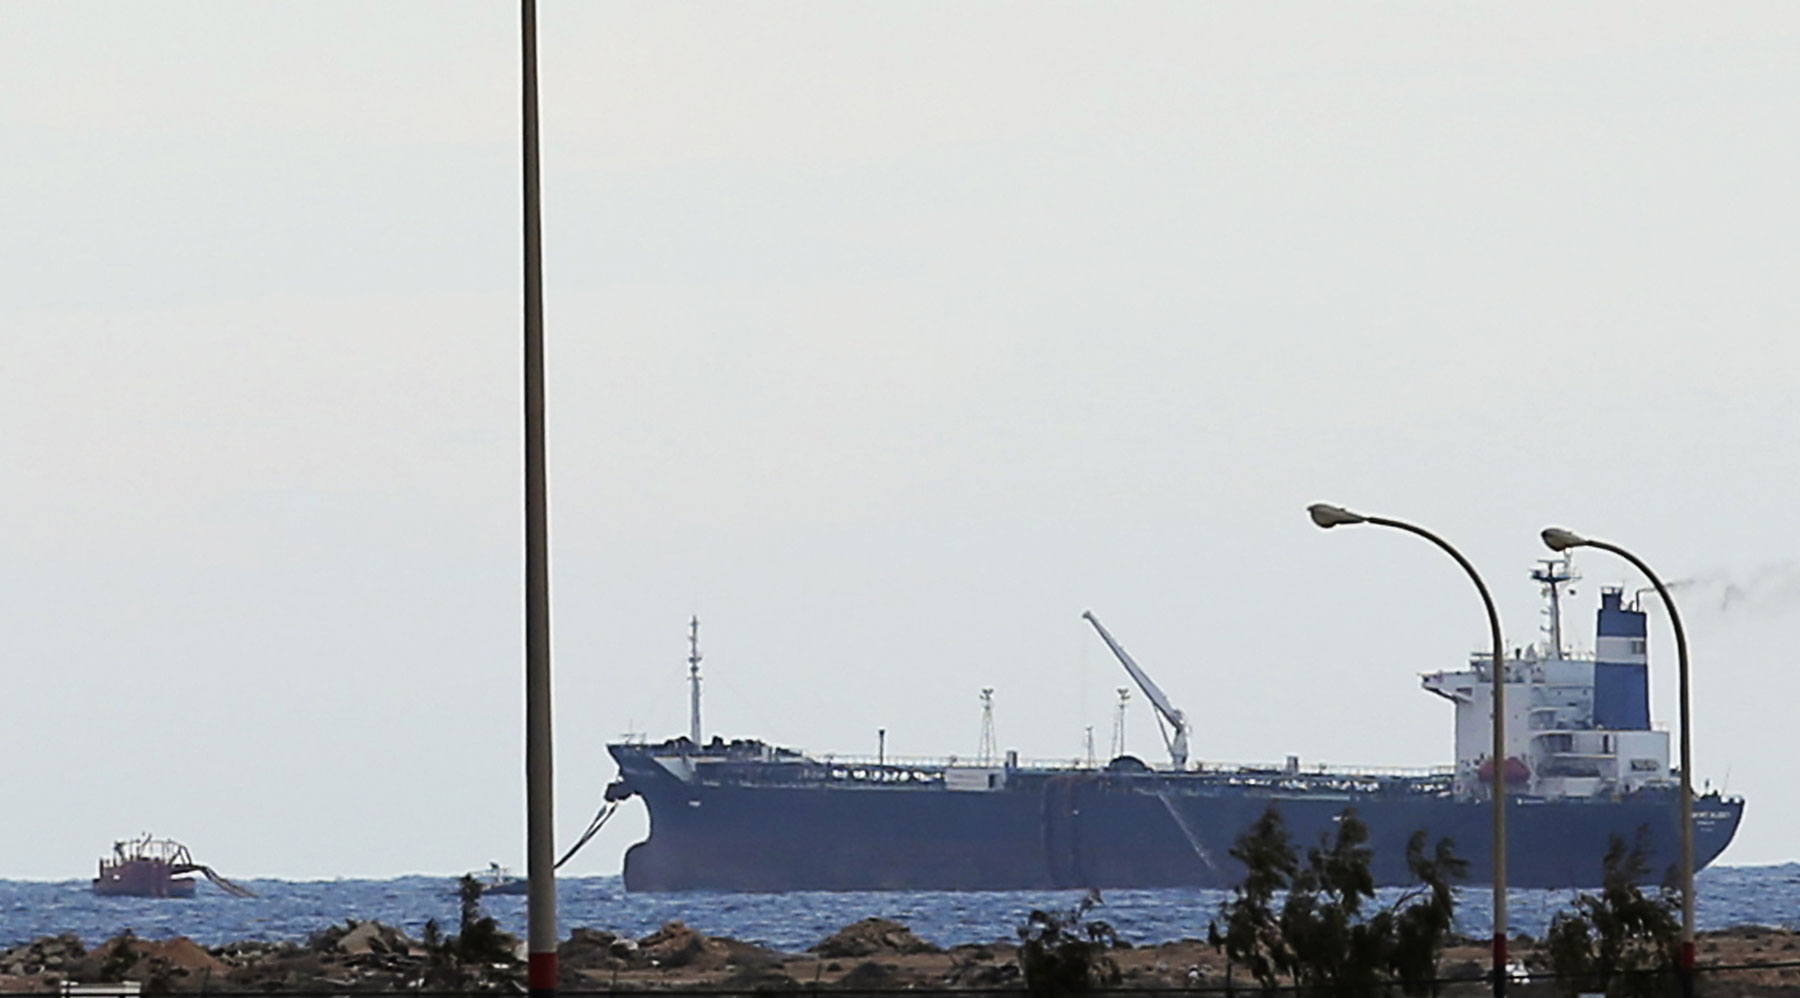 A North Korean-flagged tanker is docked at the Es Sider export terminal in Ras Lanuf